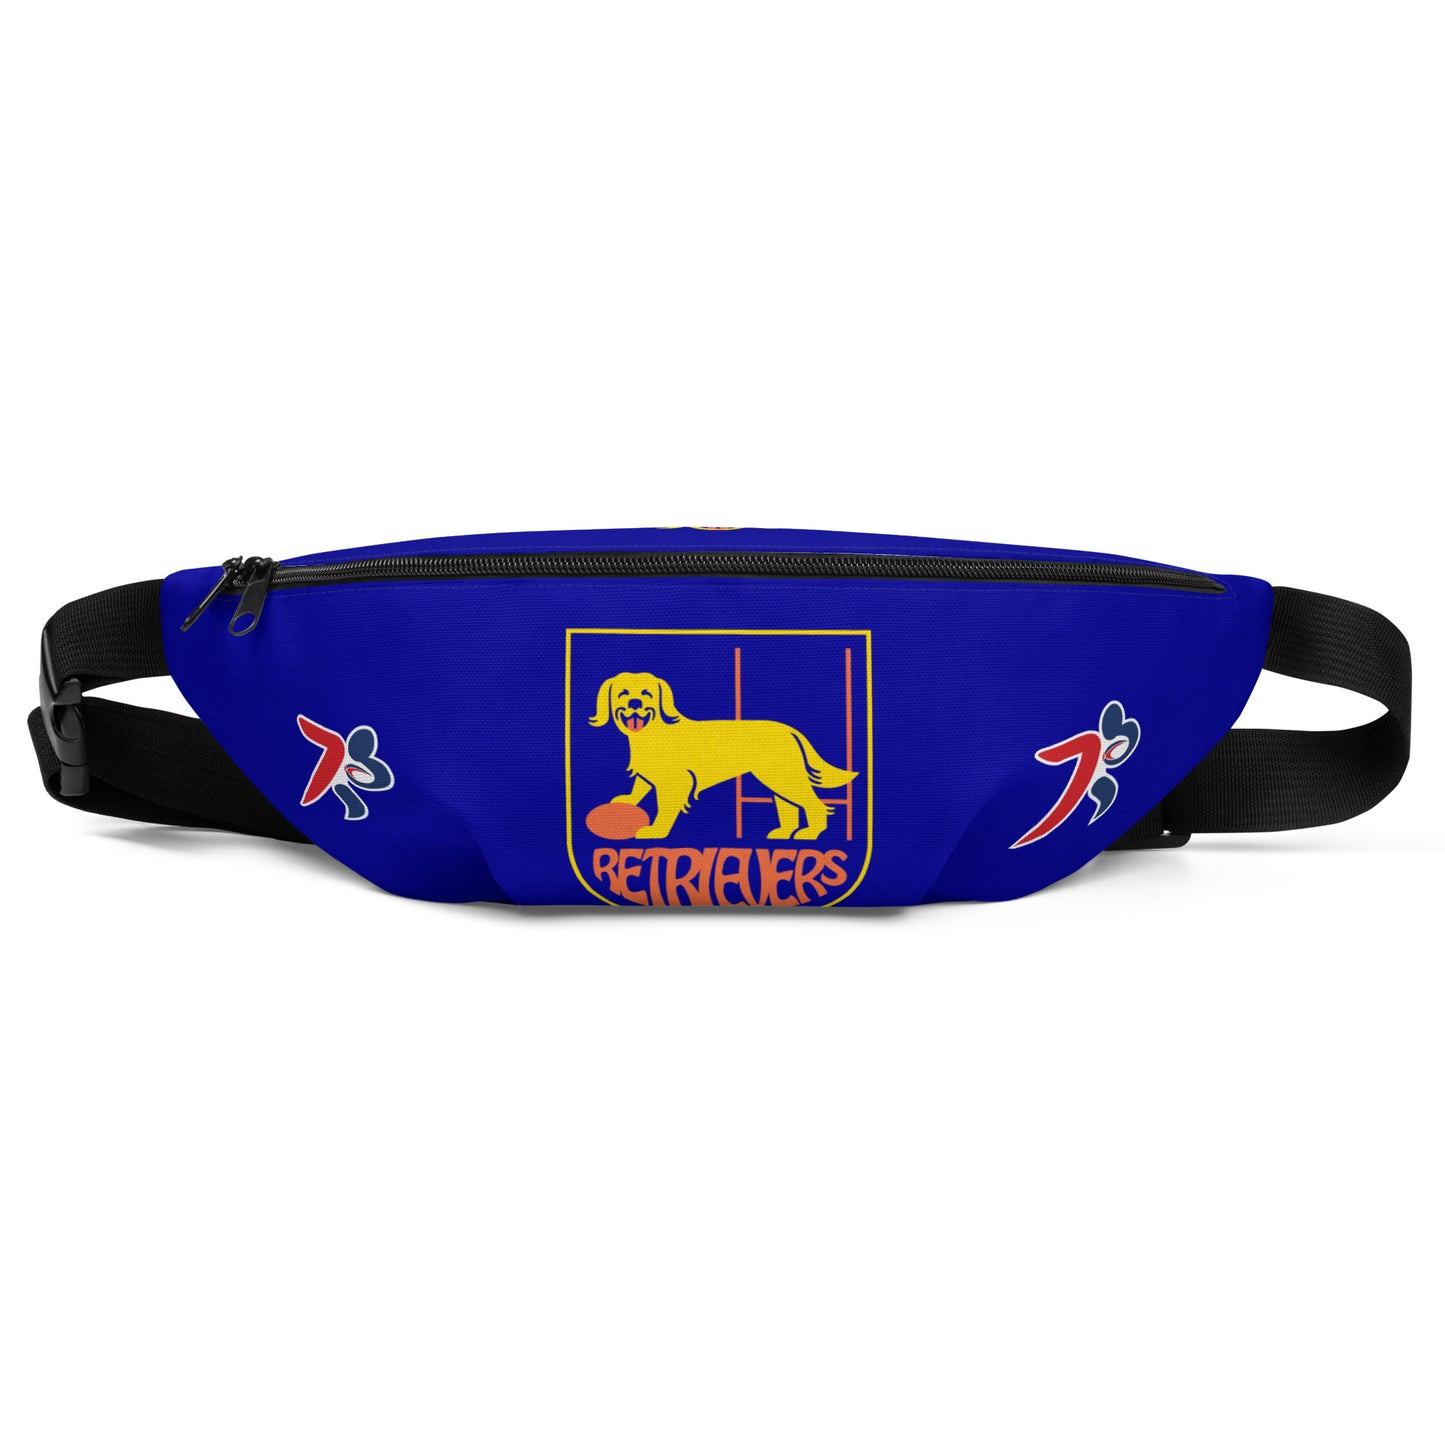 Golden State Retrievers Fanny Pack